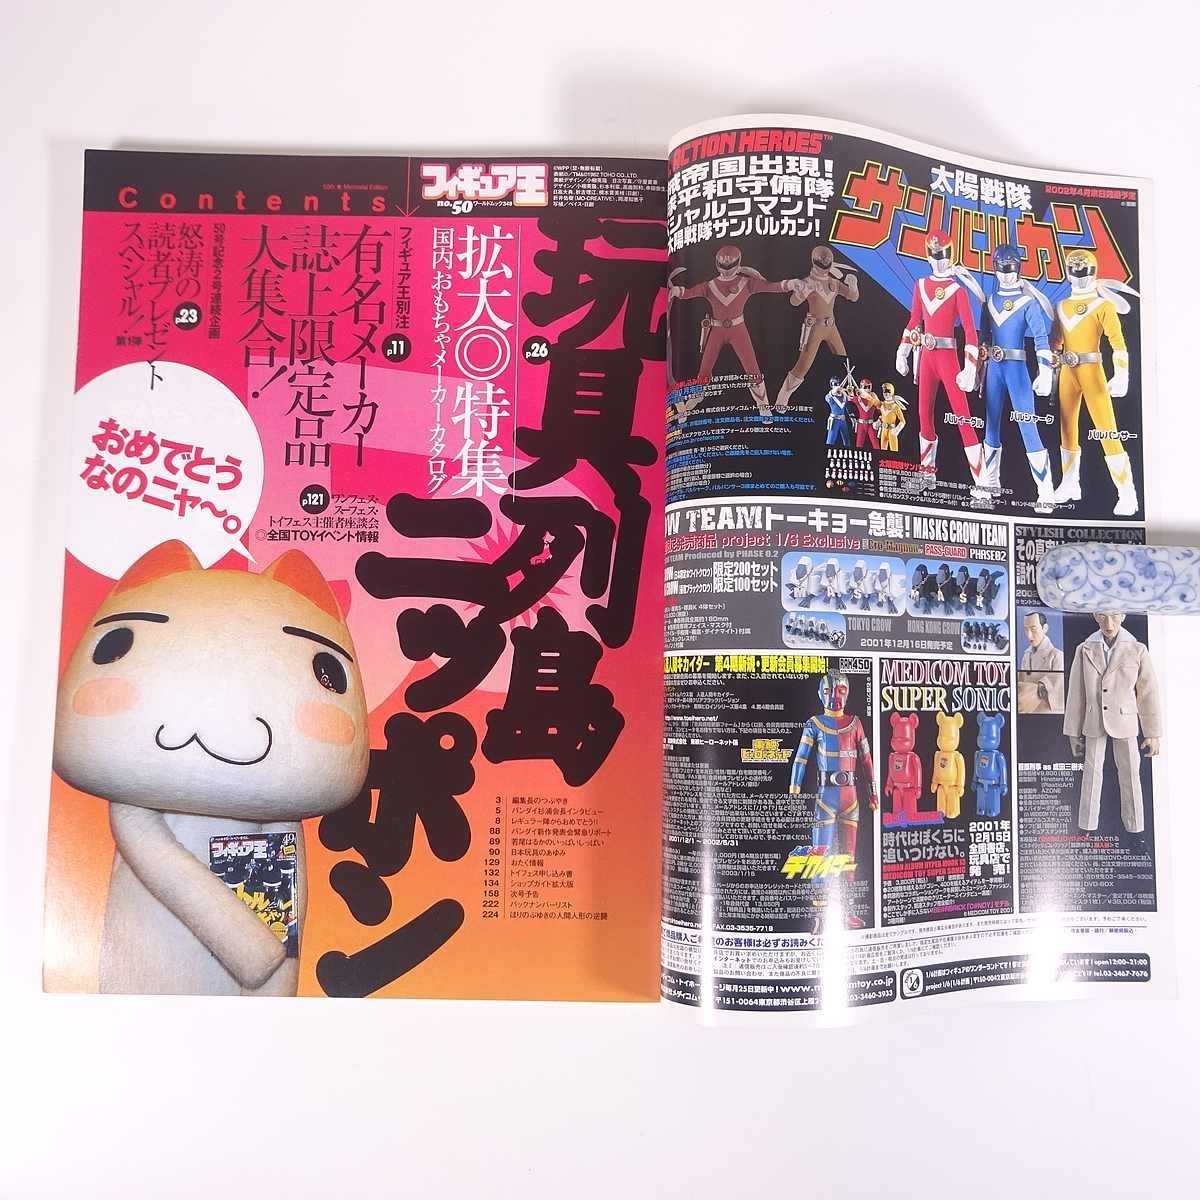  figure .No.50 2002/1/15 world photo Press magazine toy toy doll figure special collection * toy row island Nippon another 